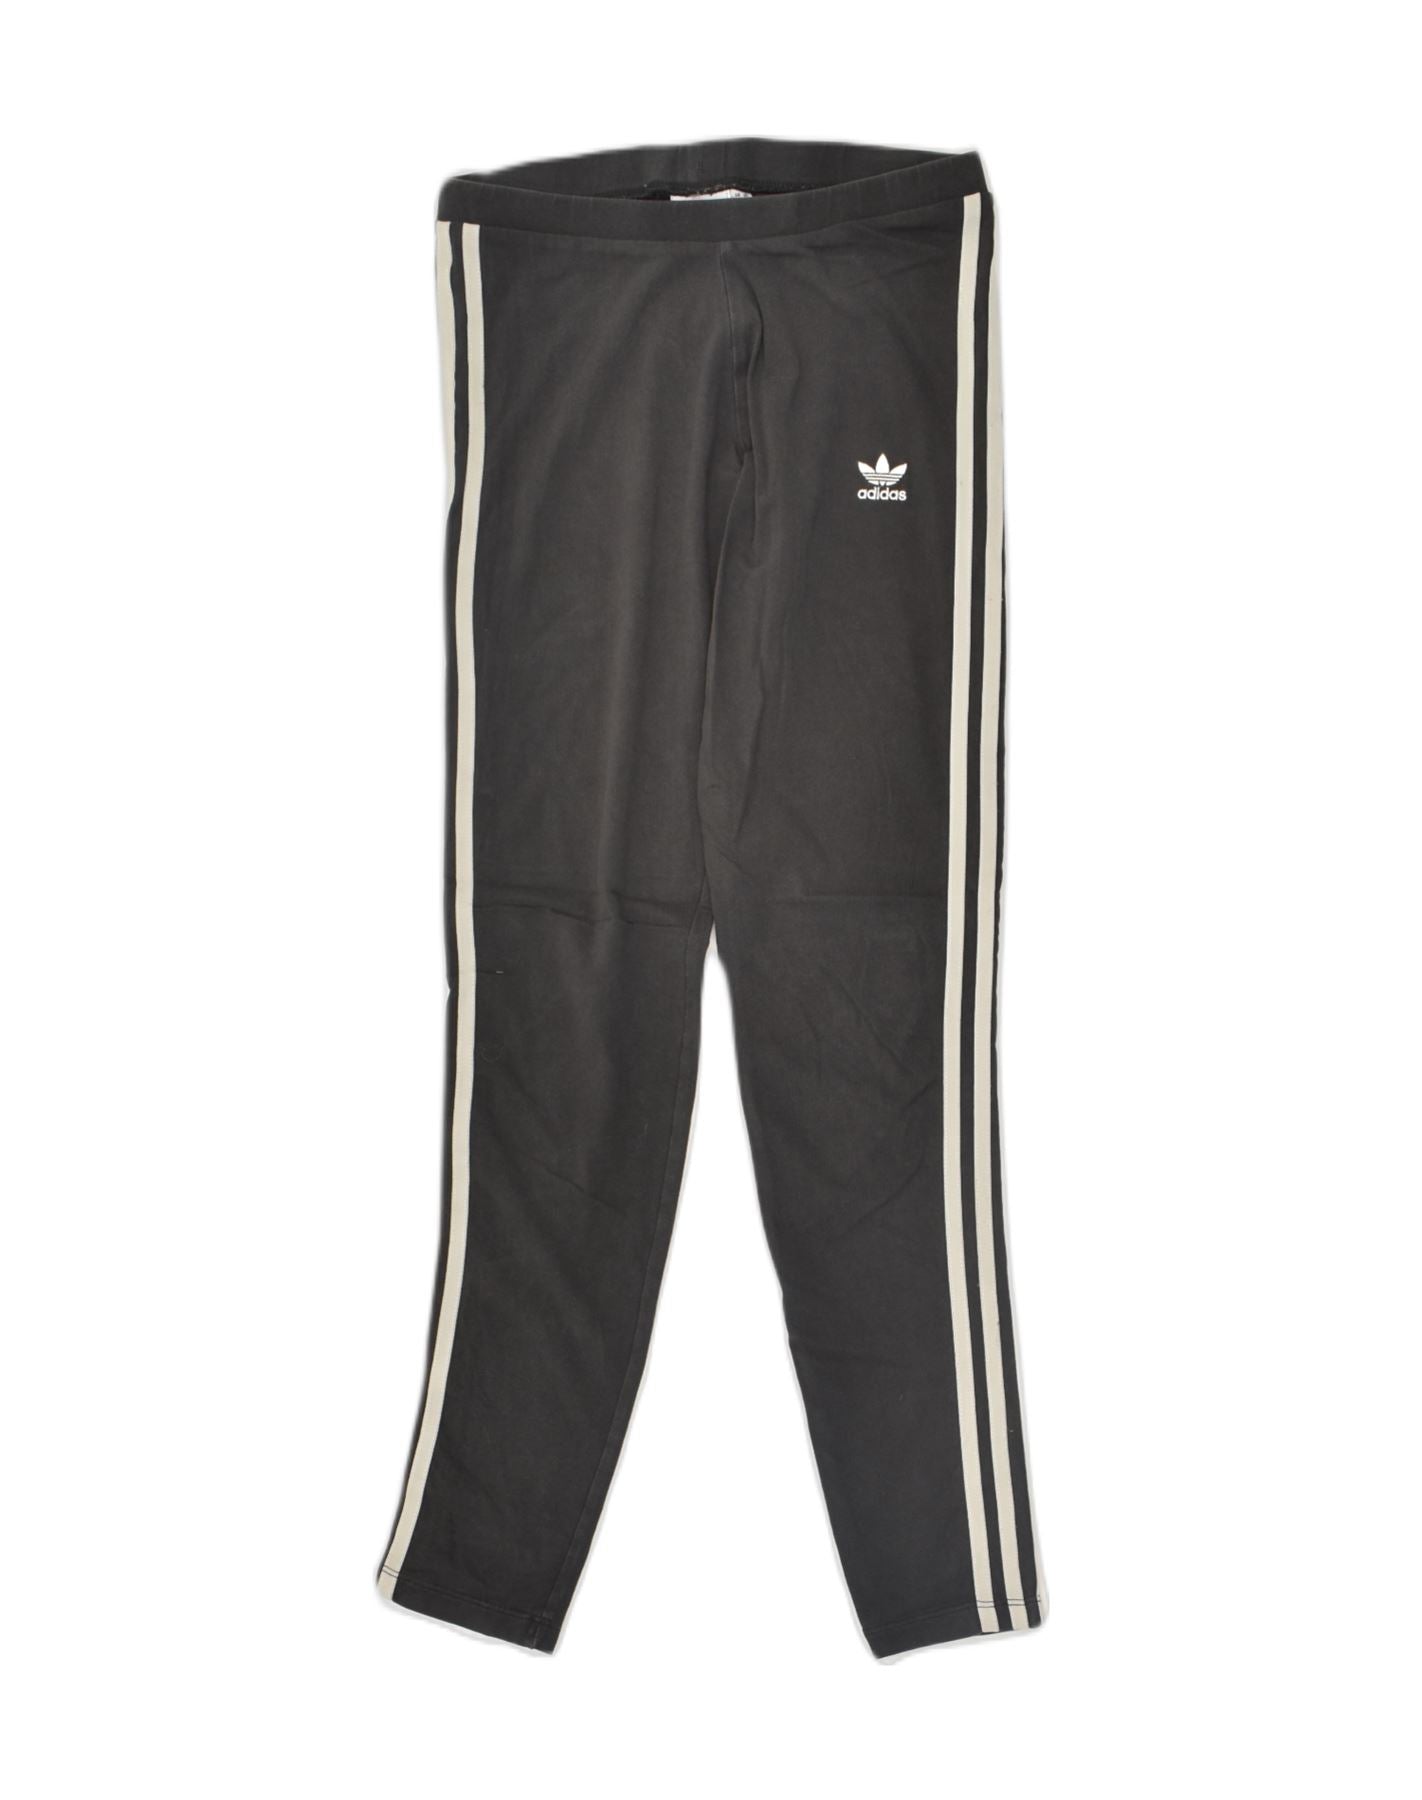 ADIDAS Womens Leggings UK 10 Small Black Cotton, Vintage & Second-Hand  Clothing Online